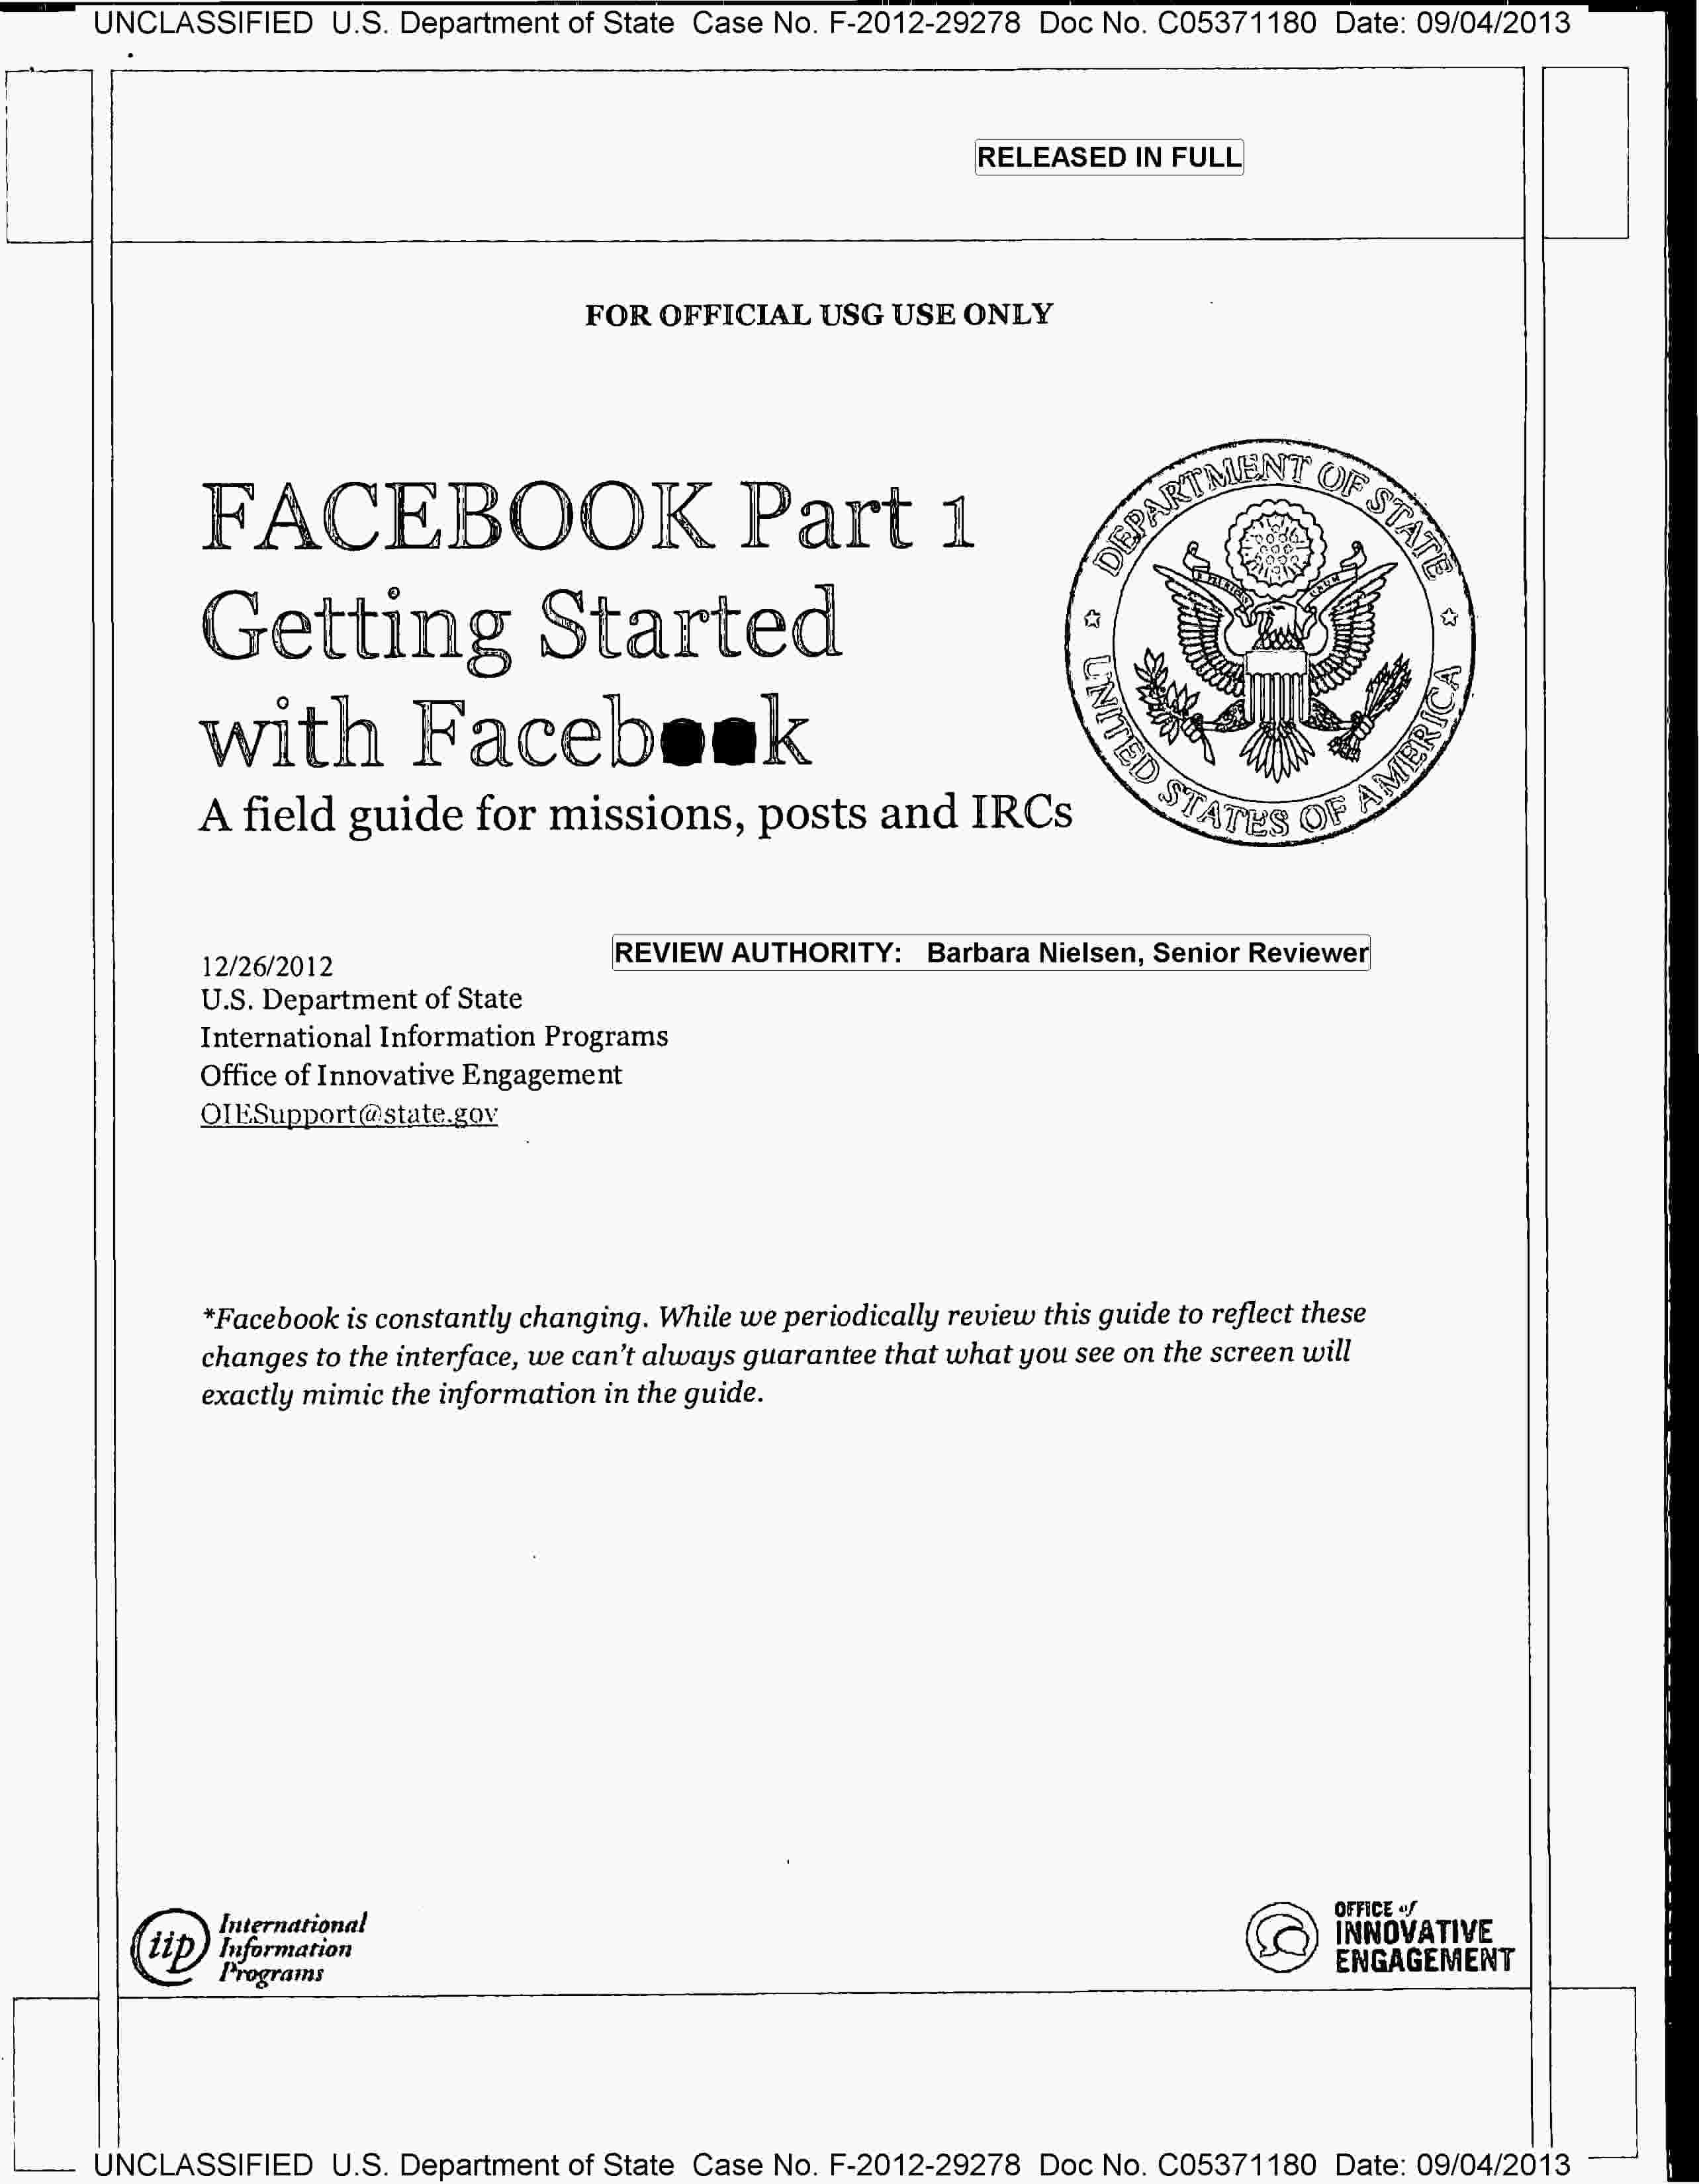 United States. Department of State. Facebook Part 1: Getting Started with Facebook - A field guide for missions, posts and IRCs. International Information Programs, Office of Innovative Engagement, Dec. 26, 2012. Judicial Watch v. U.S. State Department, Doc. No. C05371180, Case No. F-2012-29278, 09/04/2013 (promotes insecure Facebook and Gmail email use; this first numbered document in the four-part series is nonsensically the last dated item).